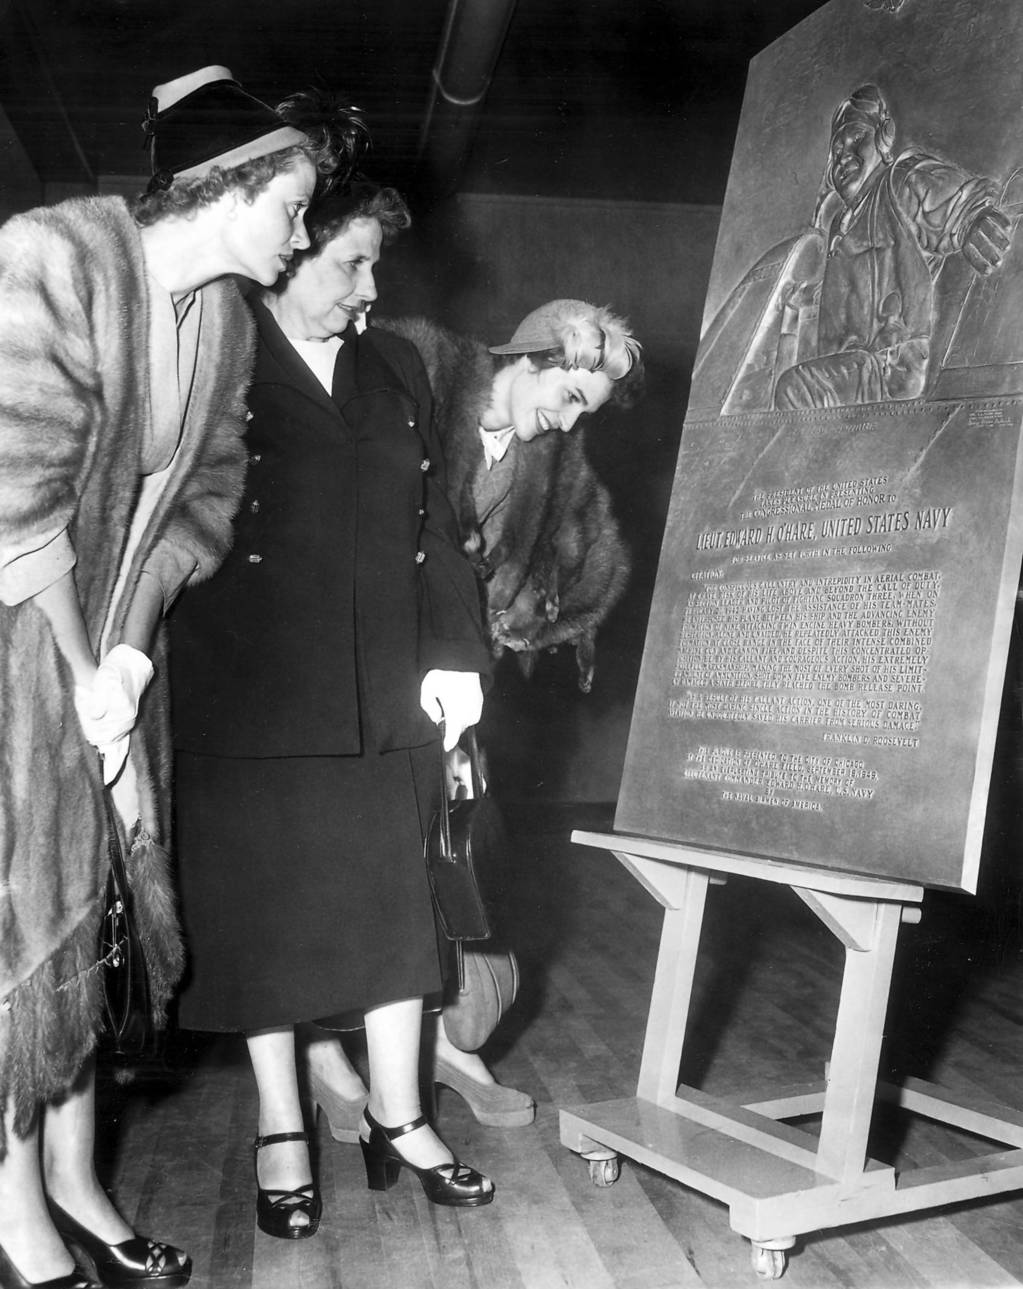 Mrs. Selma O'Hare, middle, and her daughters Mrs. Walter Palmer, left, and Mrs. Philip Tovrea, right, read the inscription on the bronze plaque commemorating the heroism of their son and brother Edward 